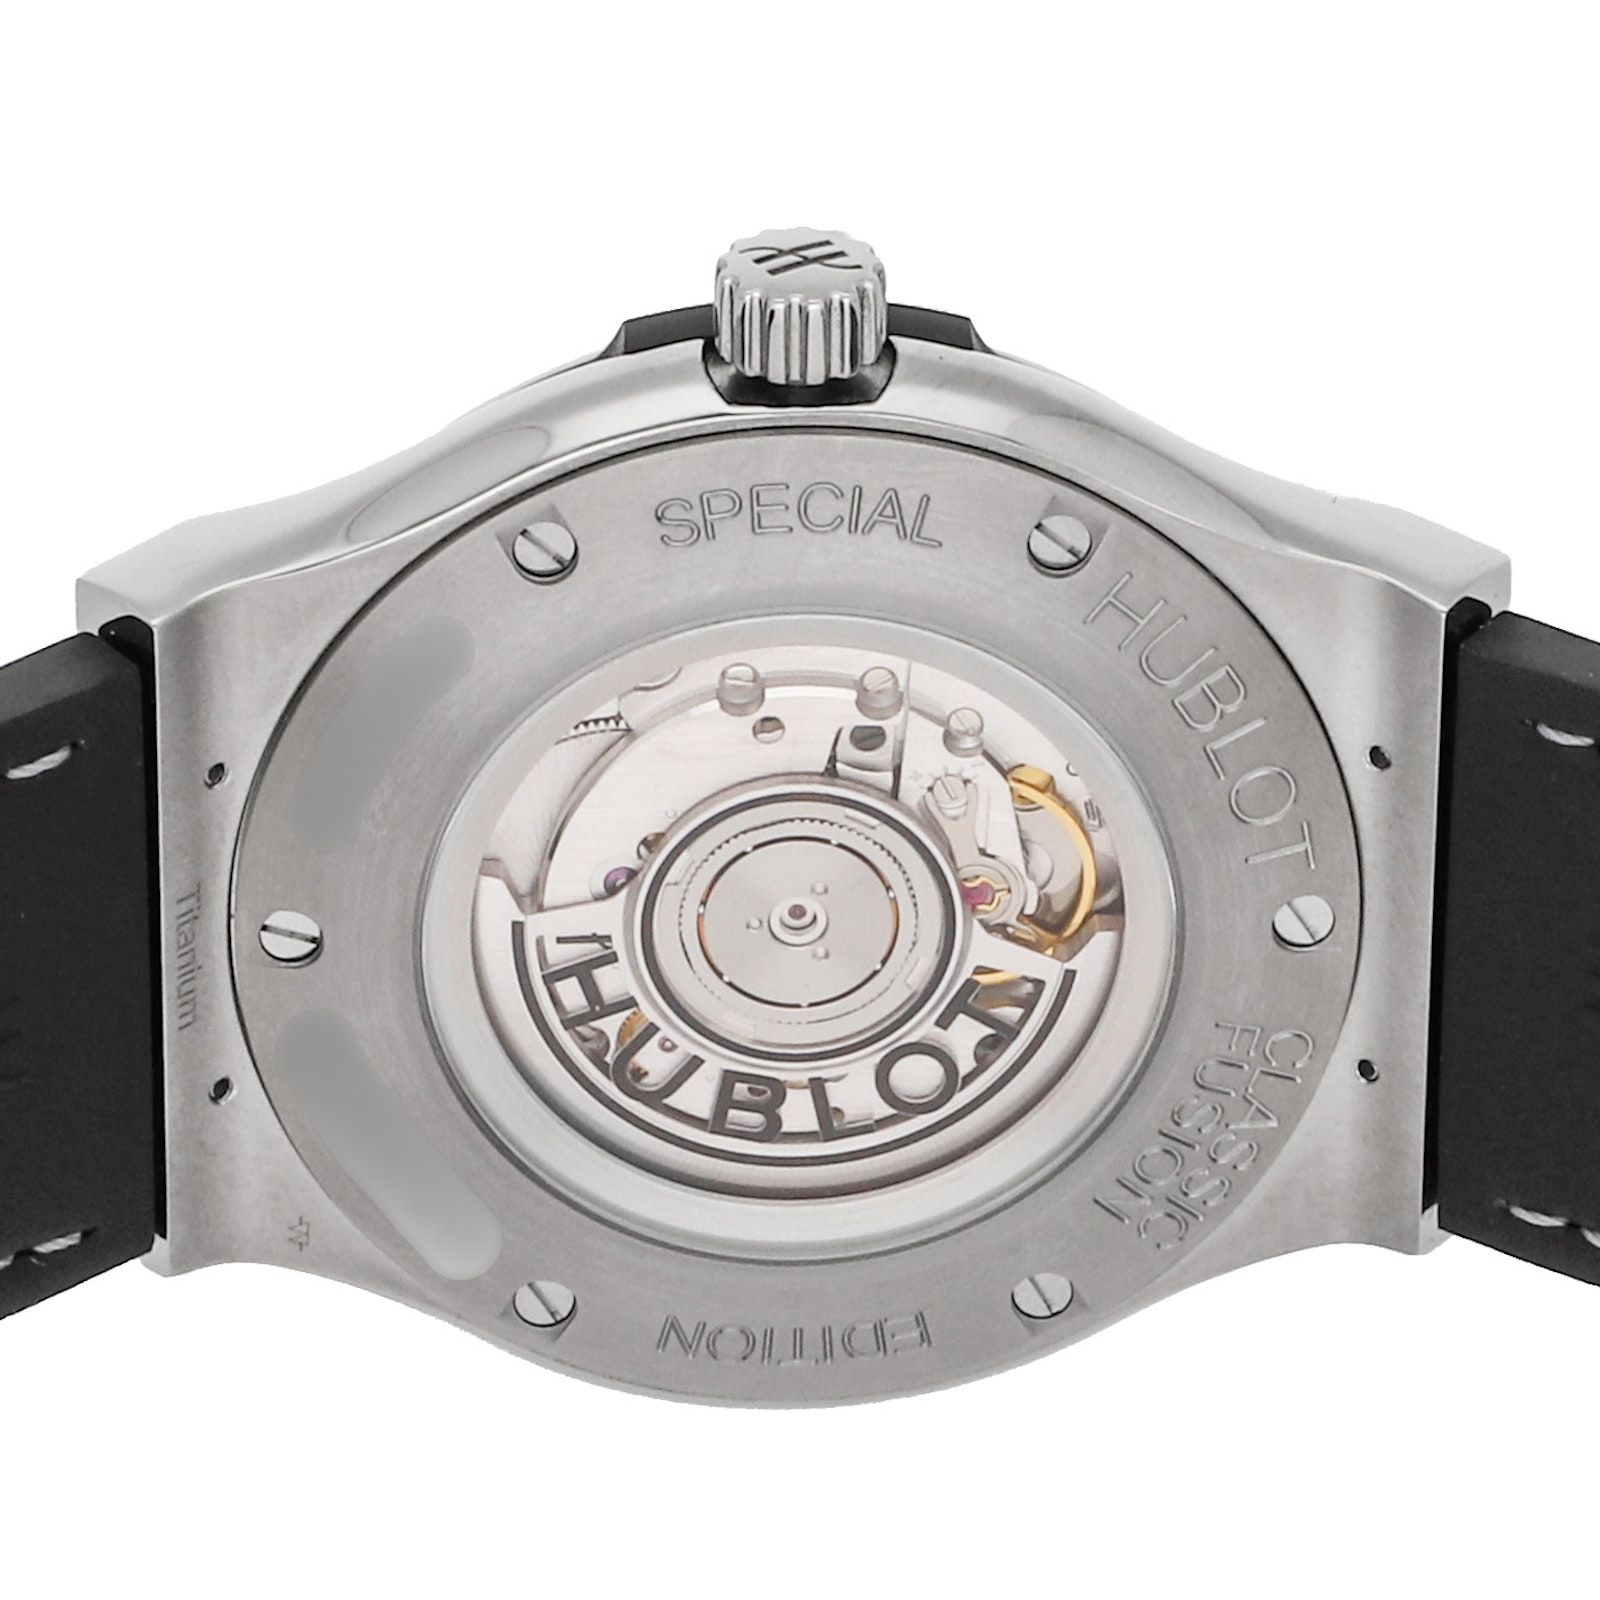 Hublot Pre-owned Classic Fusion Limited Edition 45mm